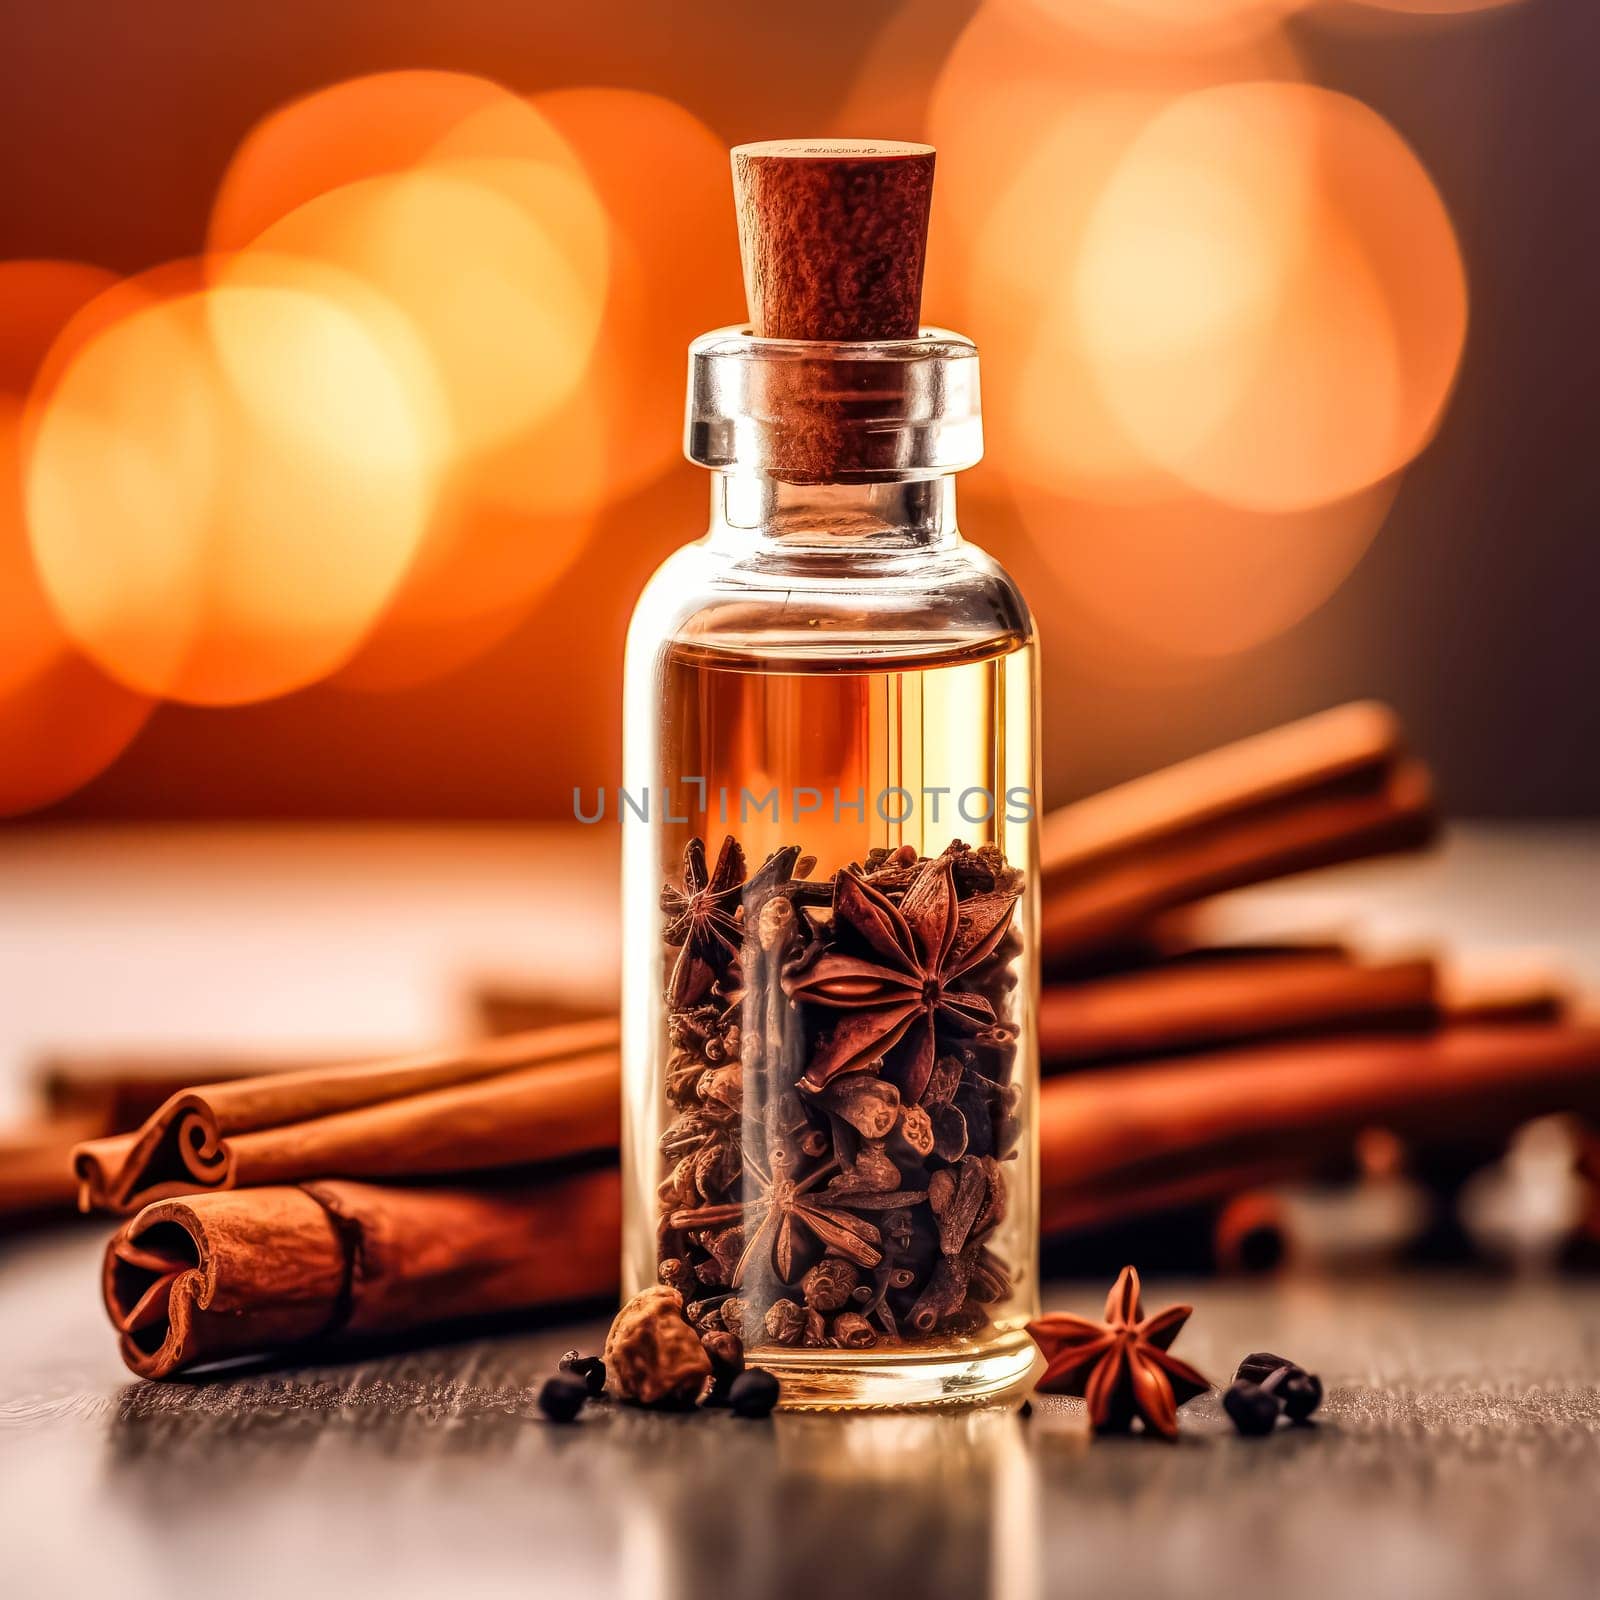 Elevate your culinary journey with this collection of exquisite spices cinnamon, star anise, coriander, and anise, beautifully presented in glass bottles